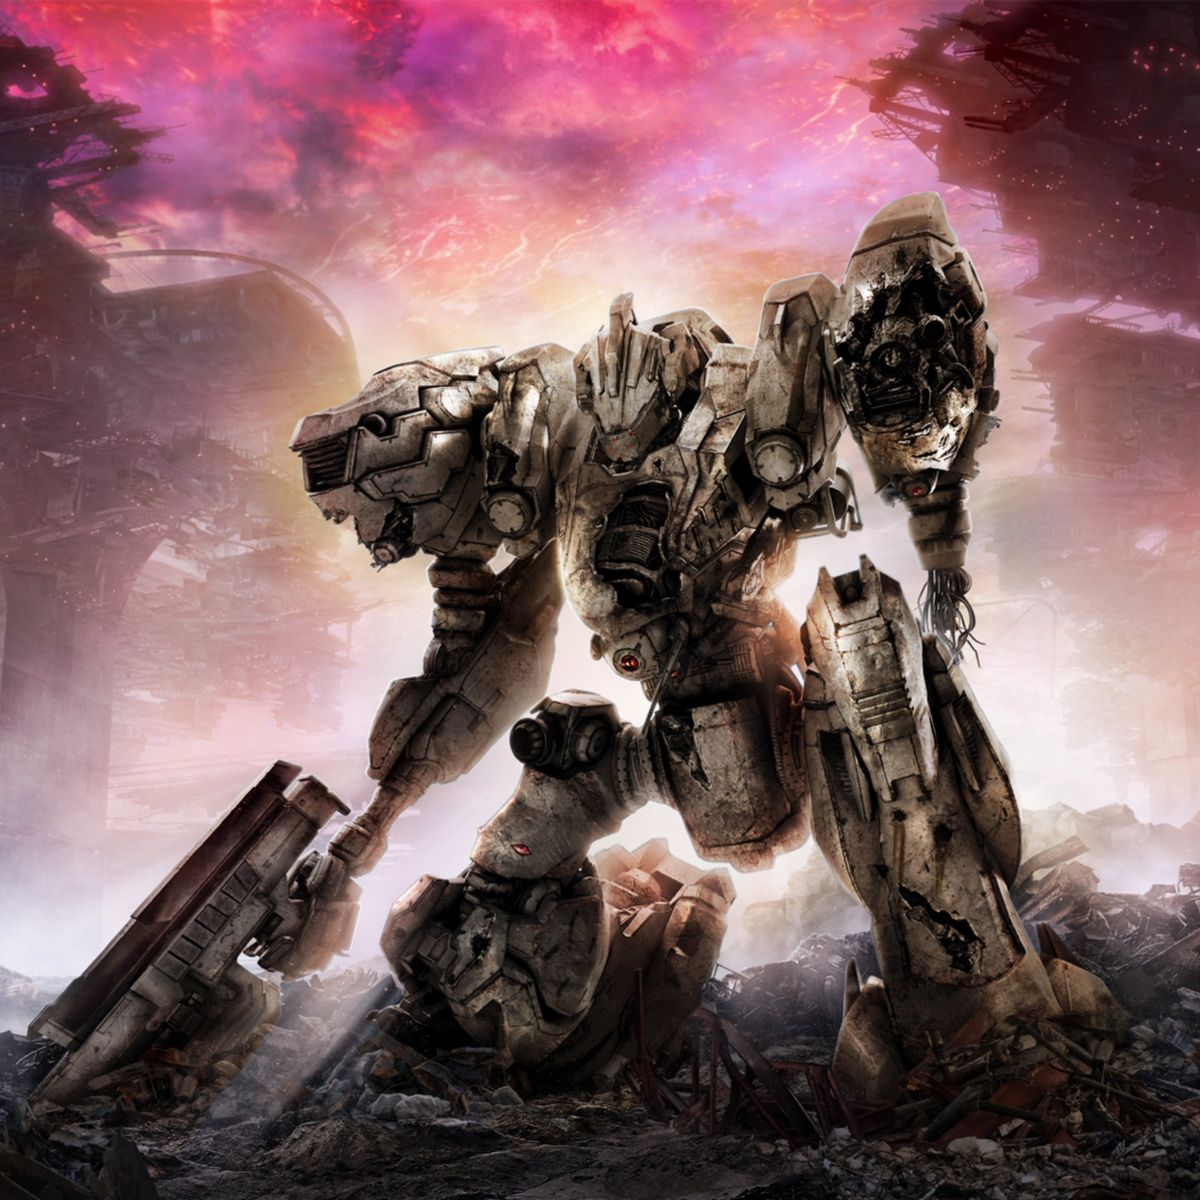 The best Armored Core 6 Fires of Rubicon deals